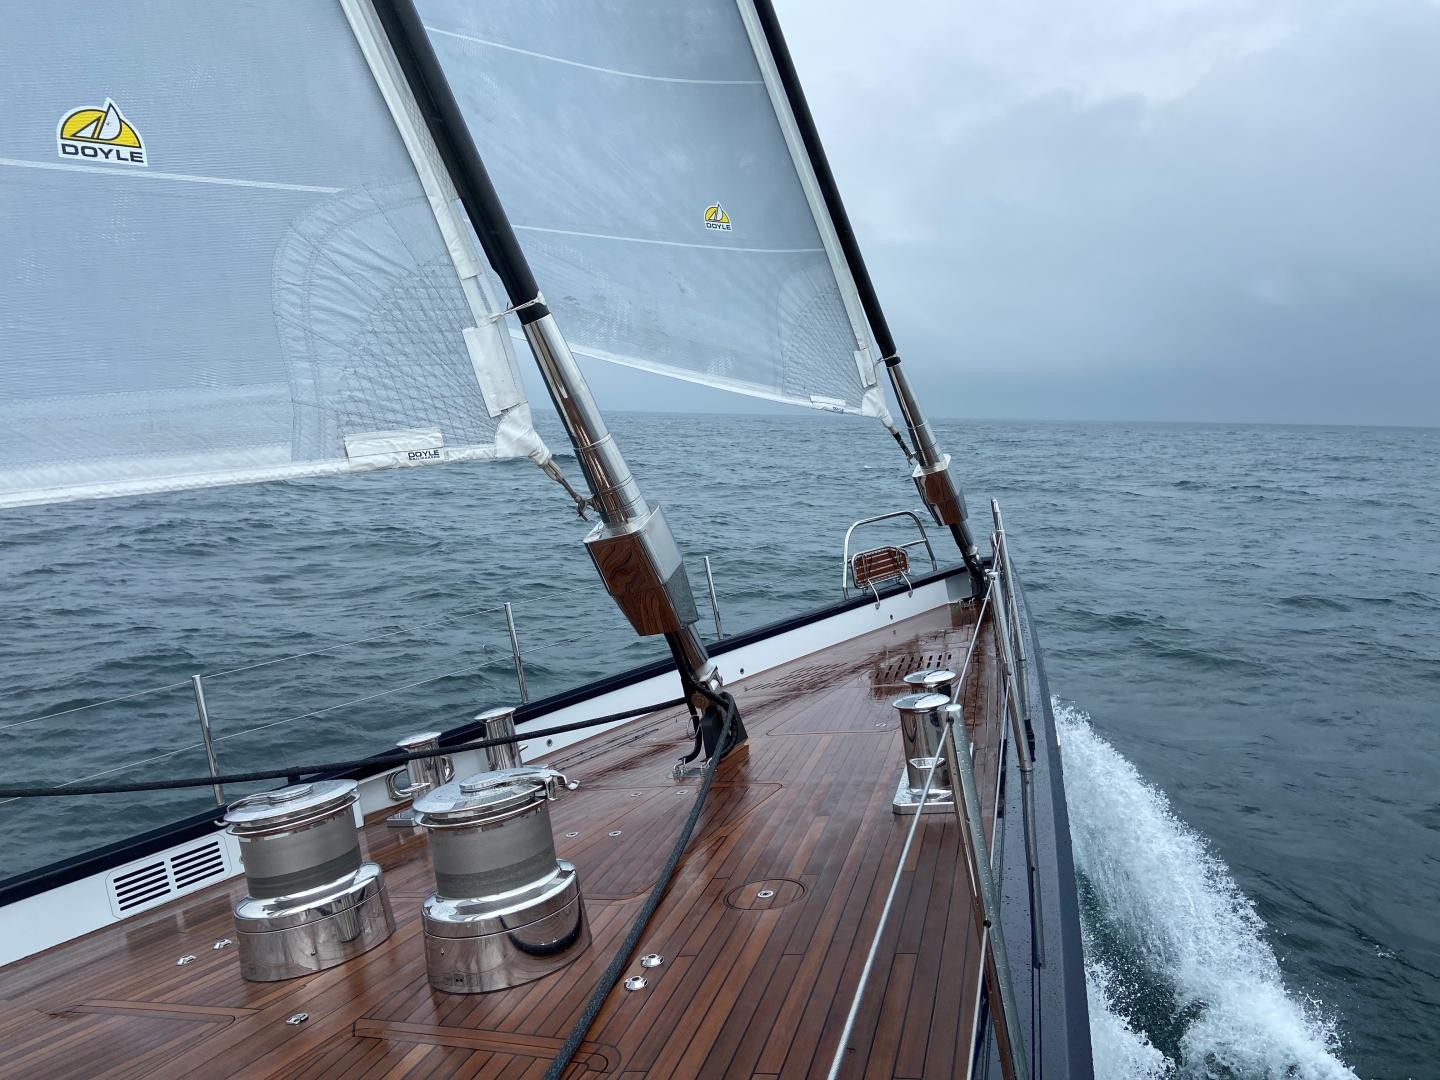 Perfectly set Structured Luff sails on the giant three-master Sea Eagle II